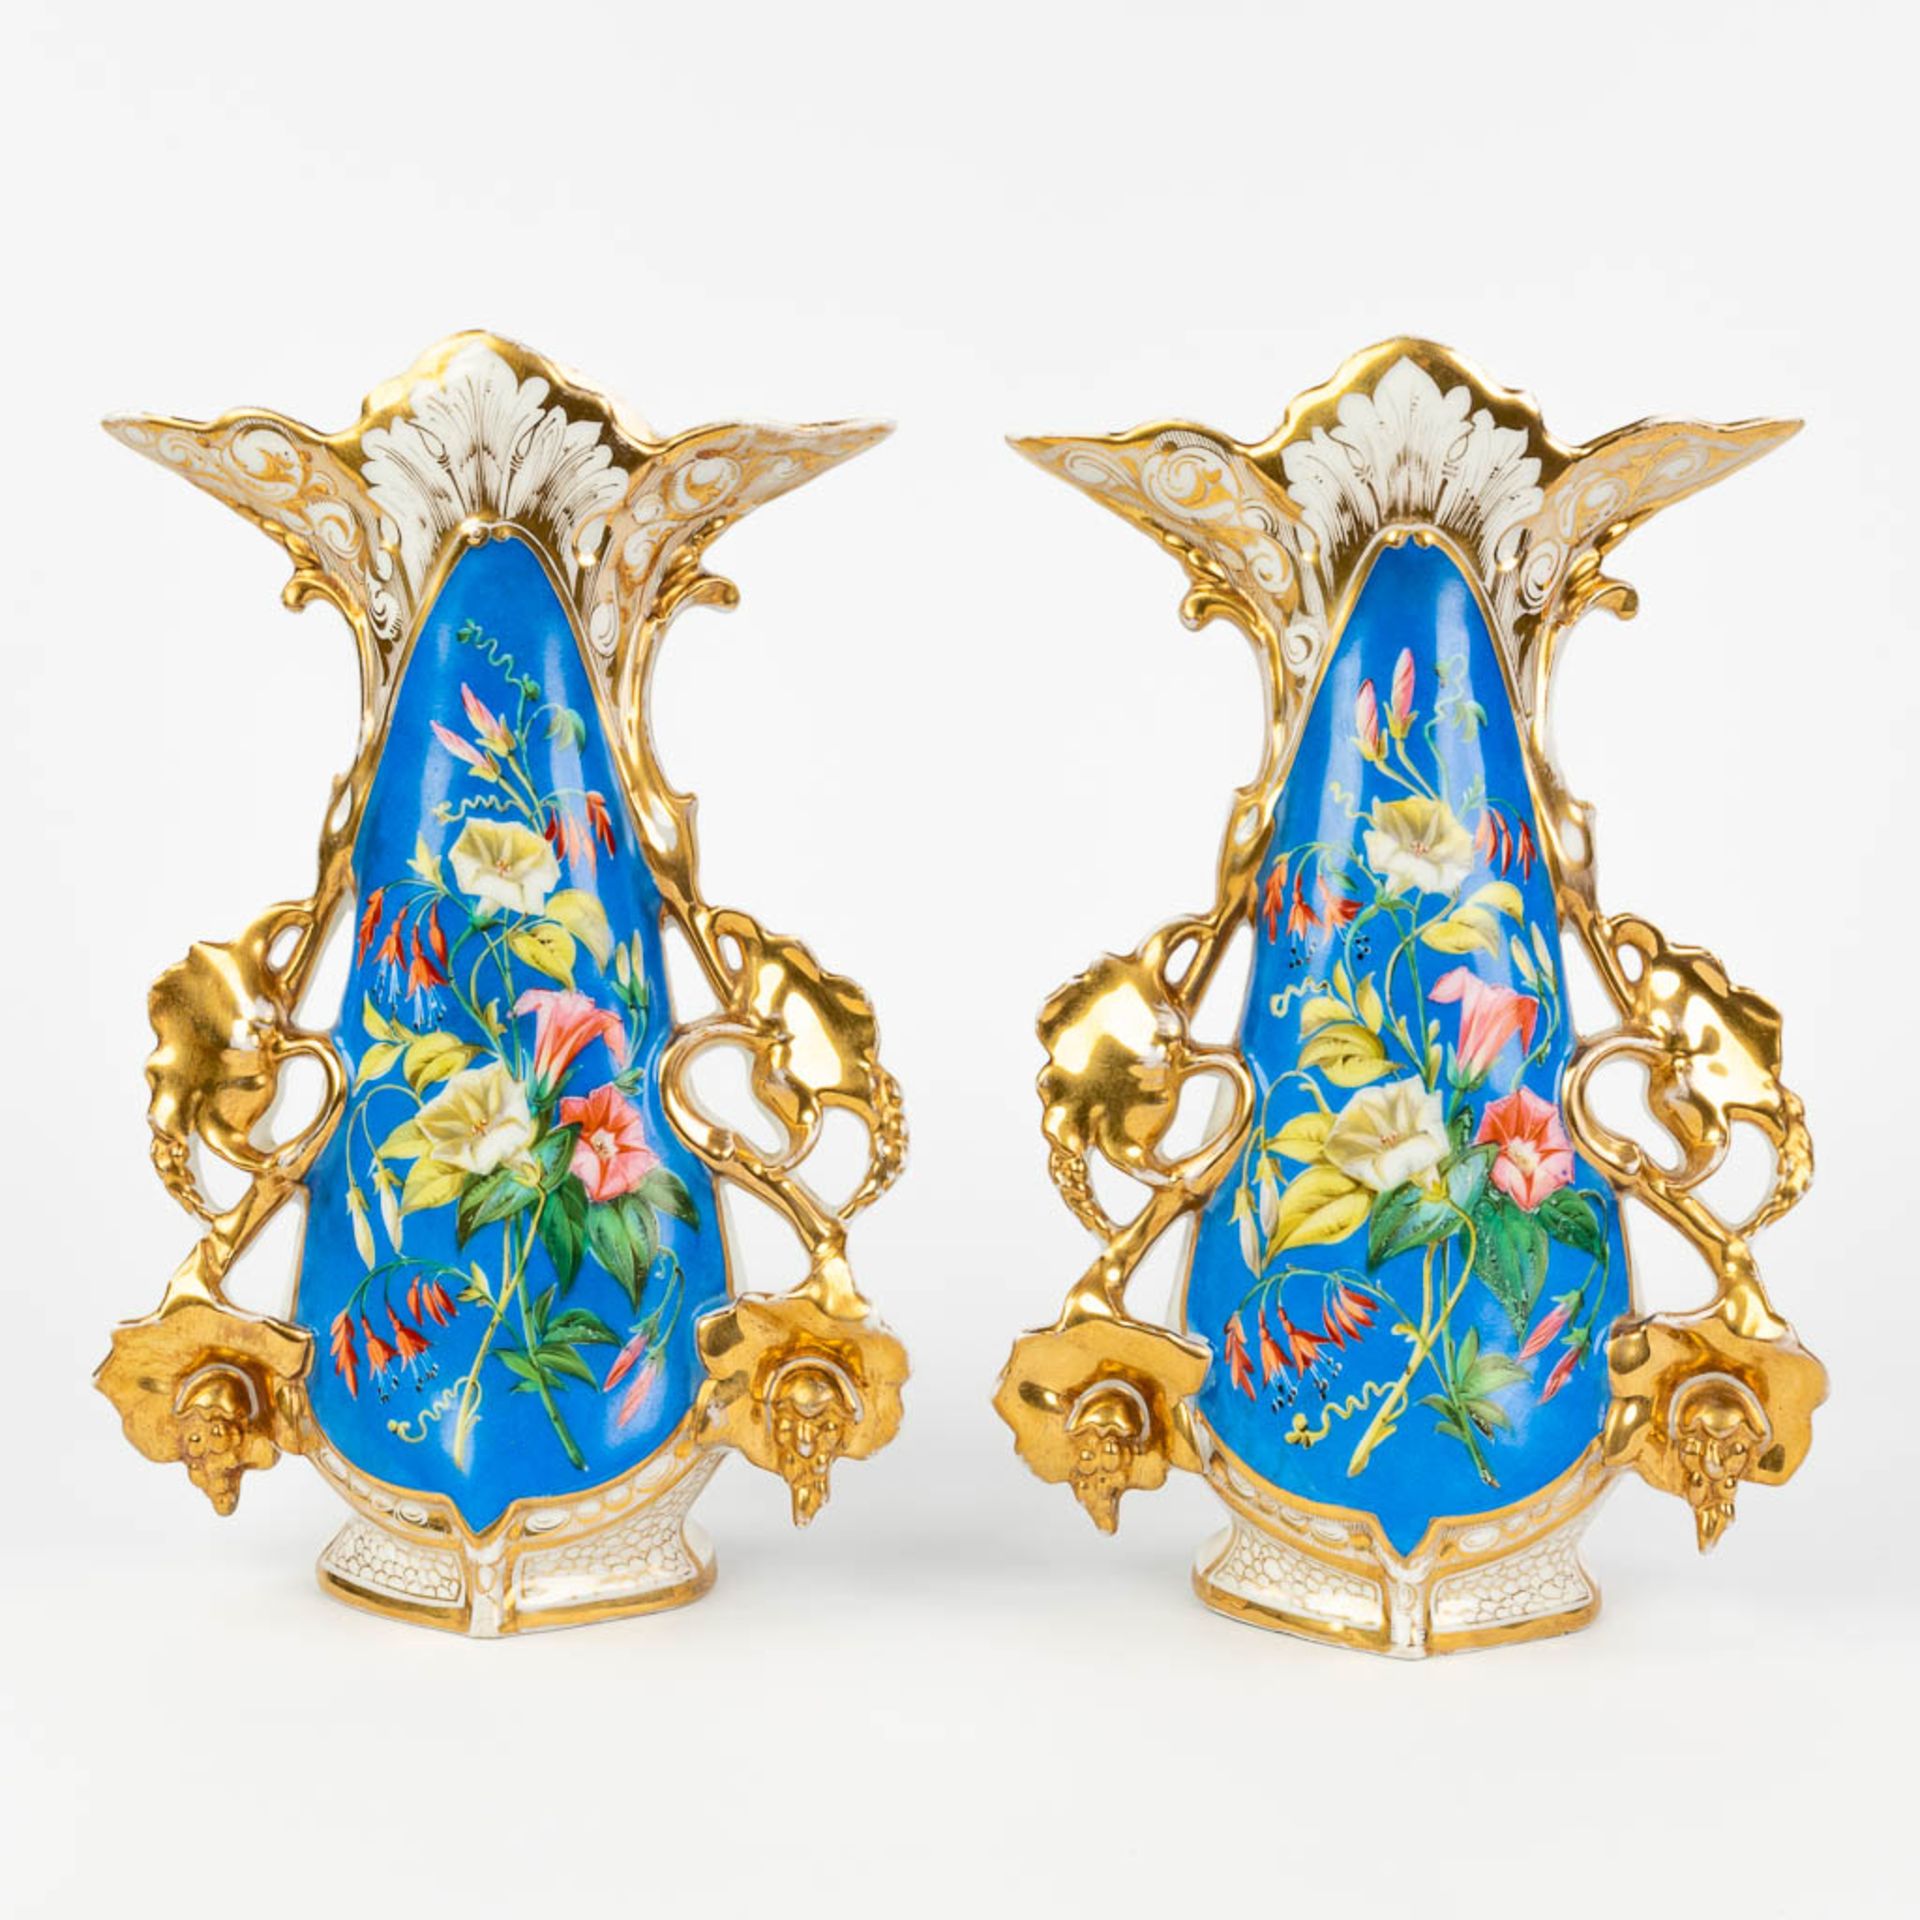 Vieux Bruxelles, A pair of vases with gold and blue decor and decorated with flowers (W:21 x H:32 cm